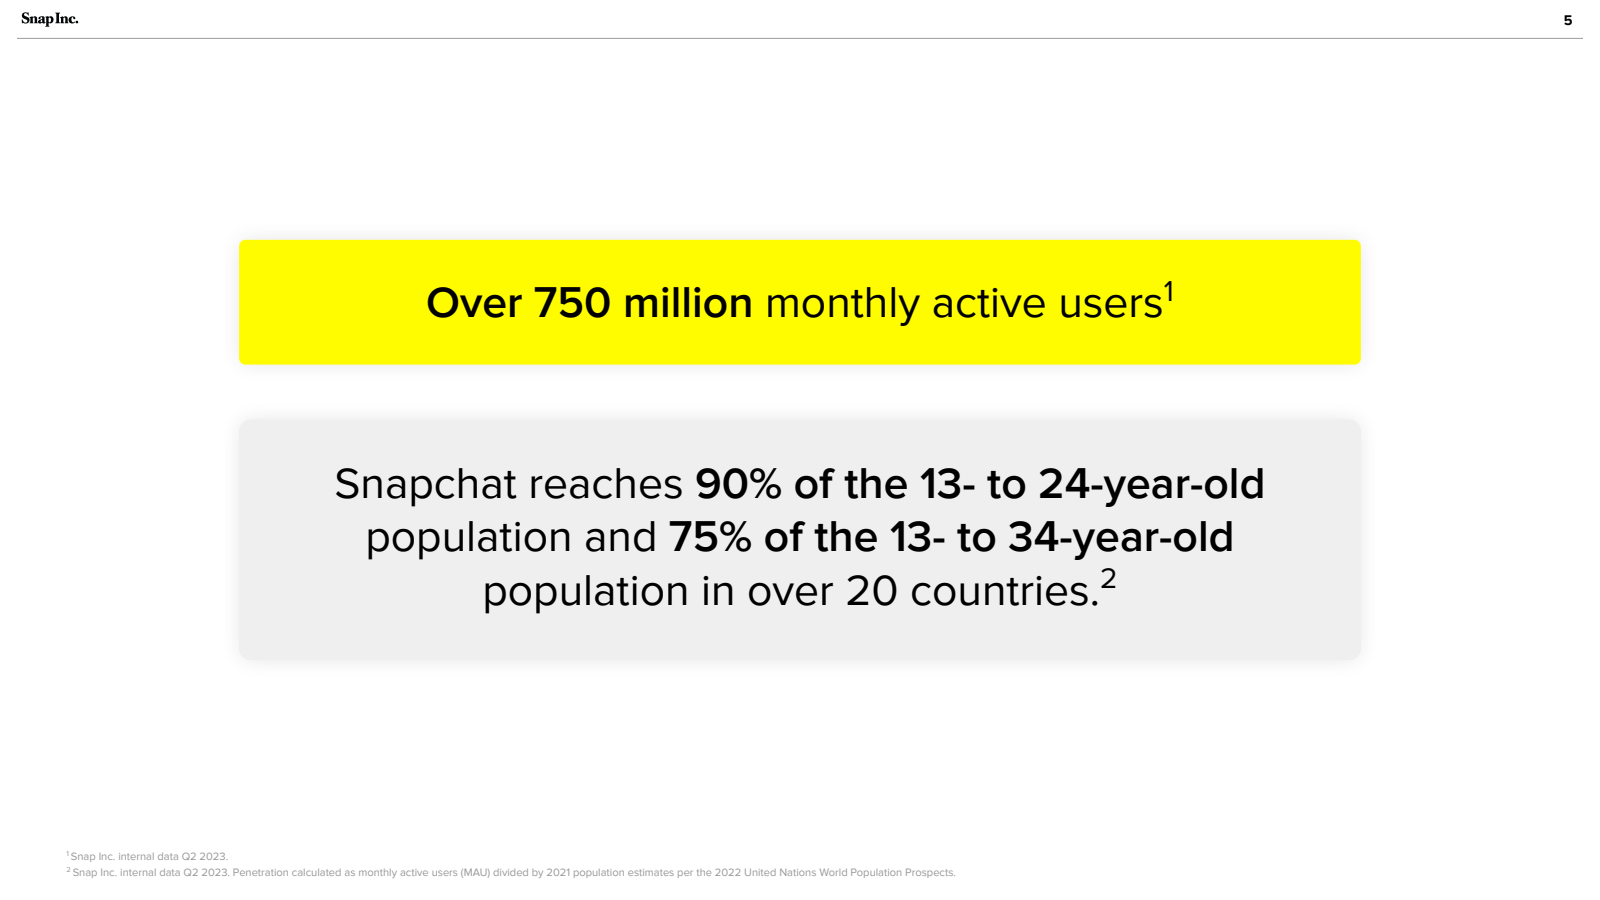 Snap Inc. 

Over 750